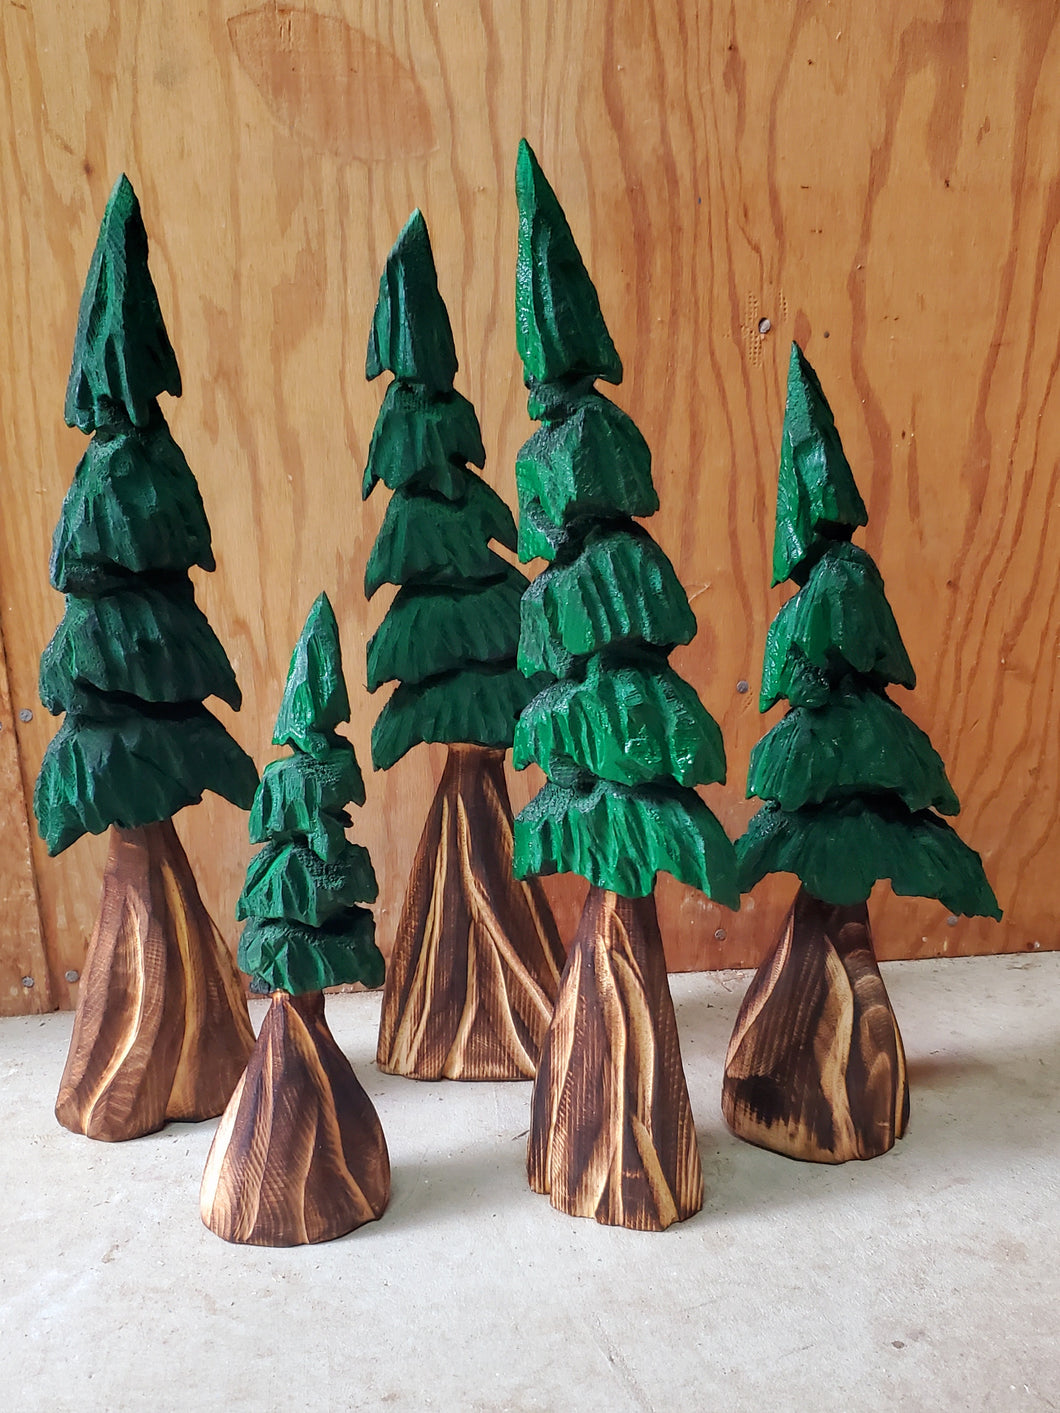 Forest of 5 Chainsaw Carved Mini Painted Trees | Shelf +Table Top Tree Sculpture Set